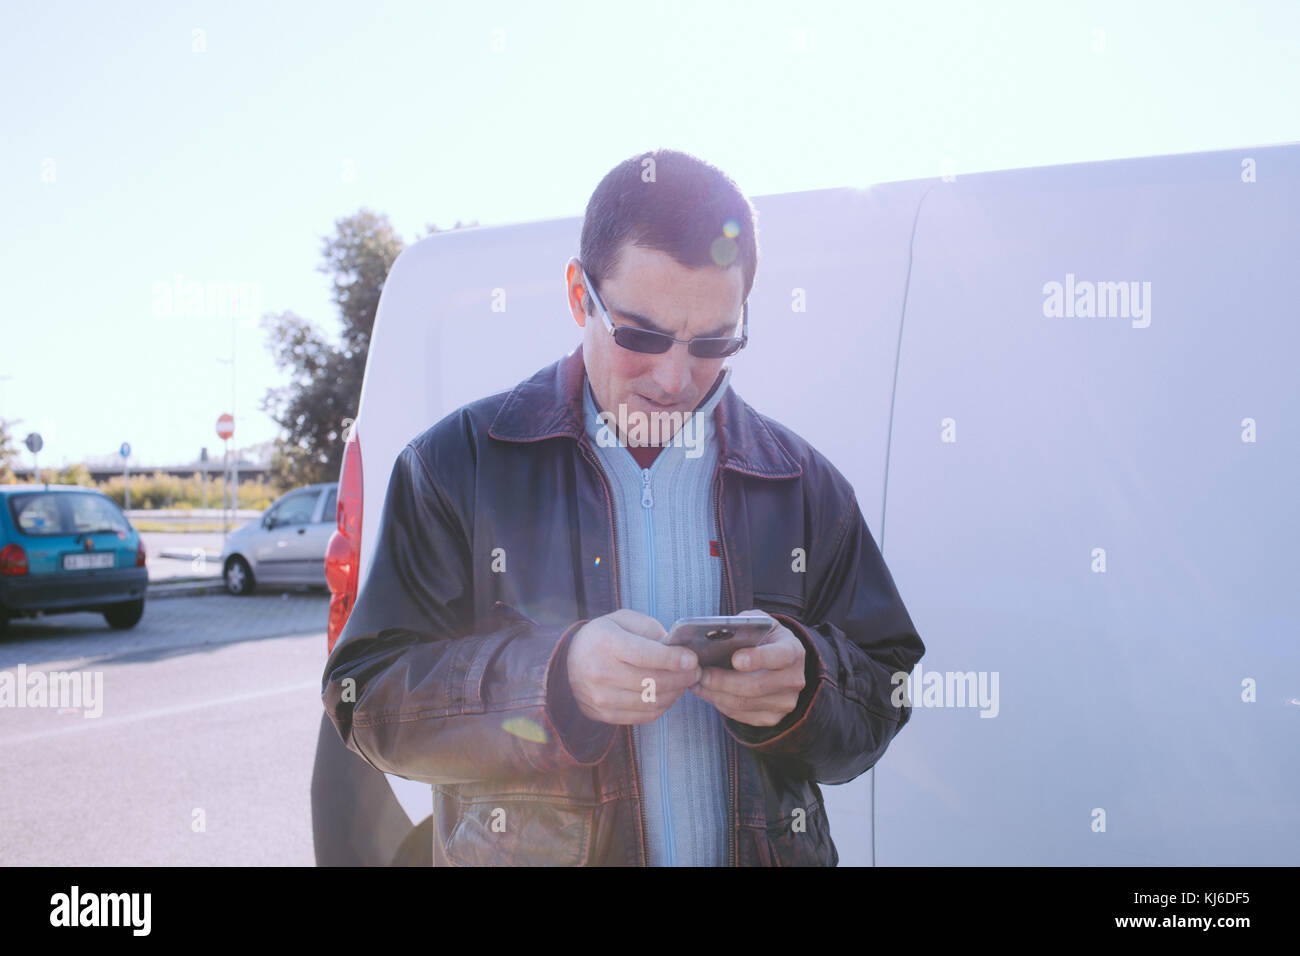 Man with casual look in outdoors checking smartphone. Stock Photo